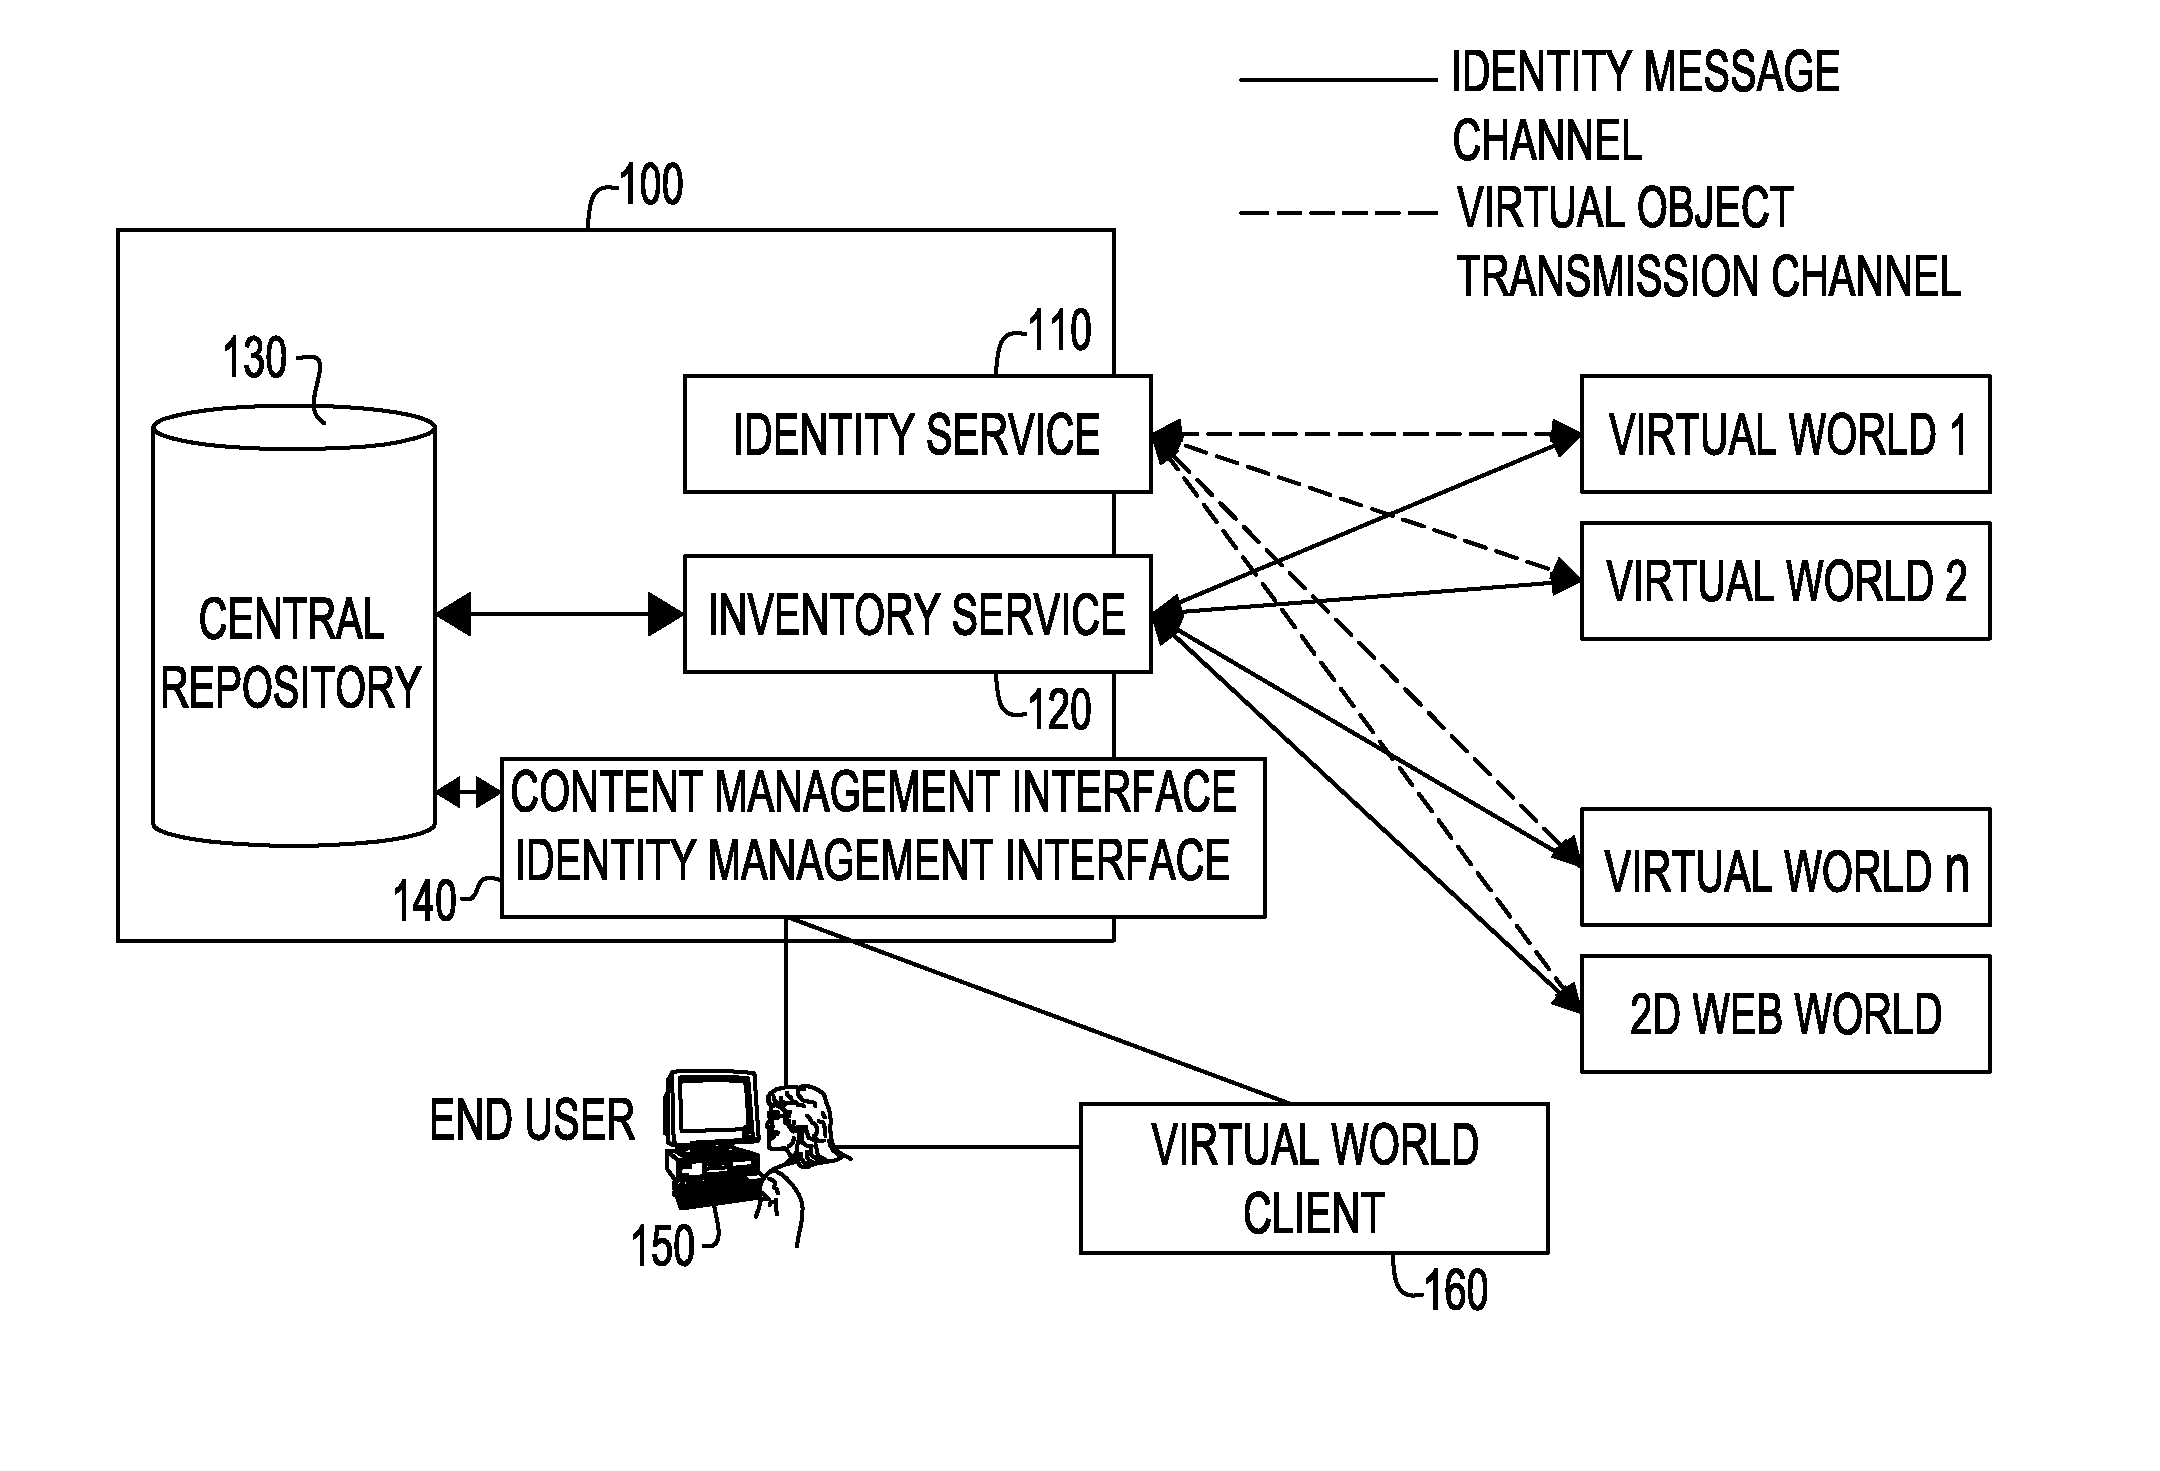 Apparatus and method of identity and virtual object management and sharing among virtual worlds